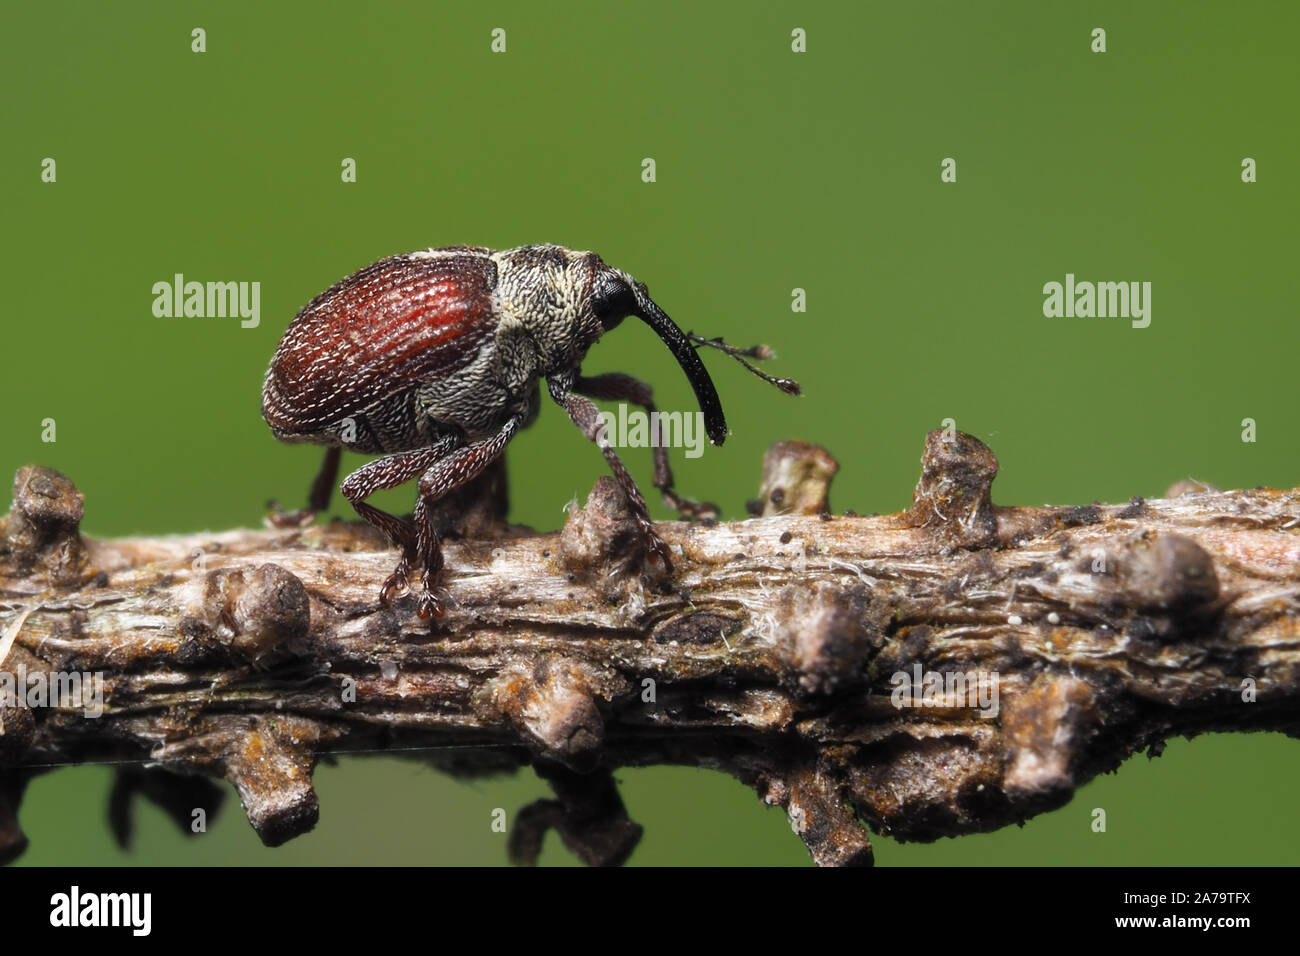 Tiny Weevil crawling on conifer tree twig. Tipperary, Ireland Stock Photo